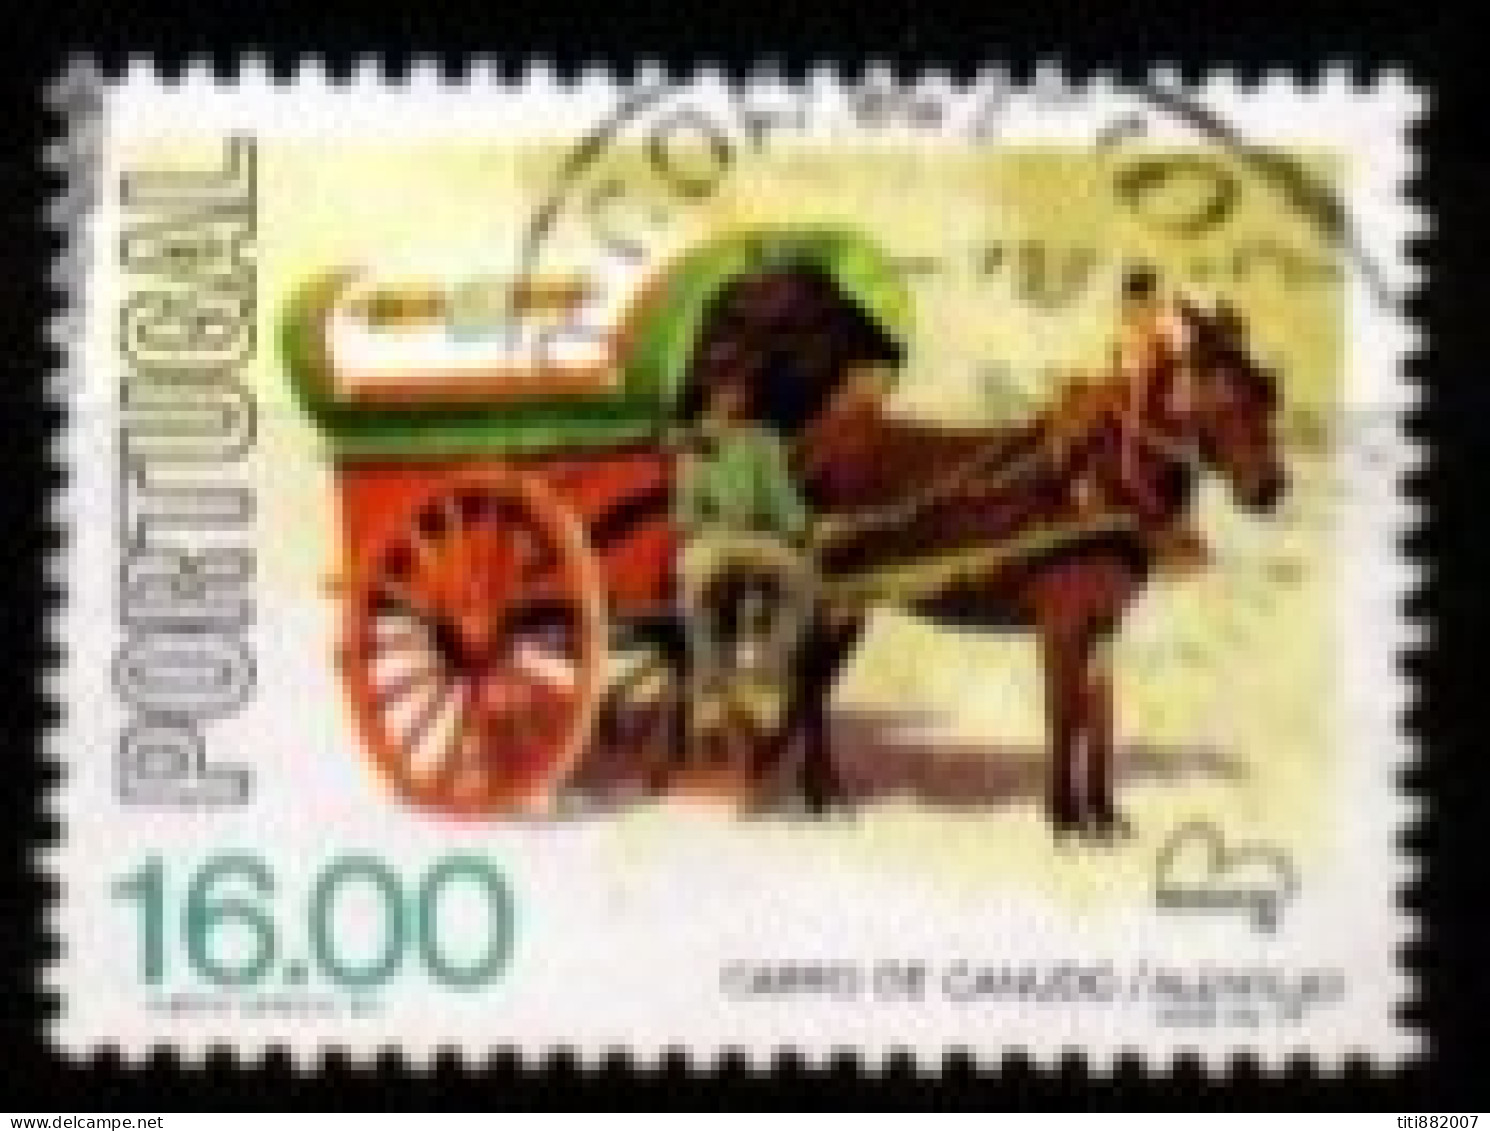 PORTUGAL    -   1979.    Y&T N° 1436 Oblitéré .   Charrette.  Cheval - Used Stamps